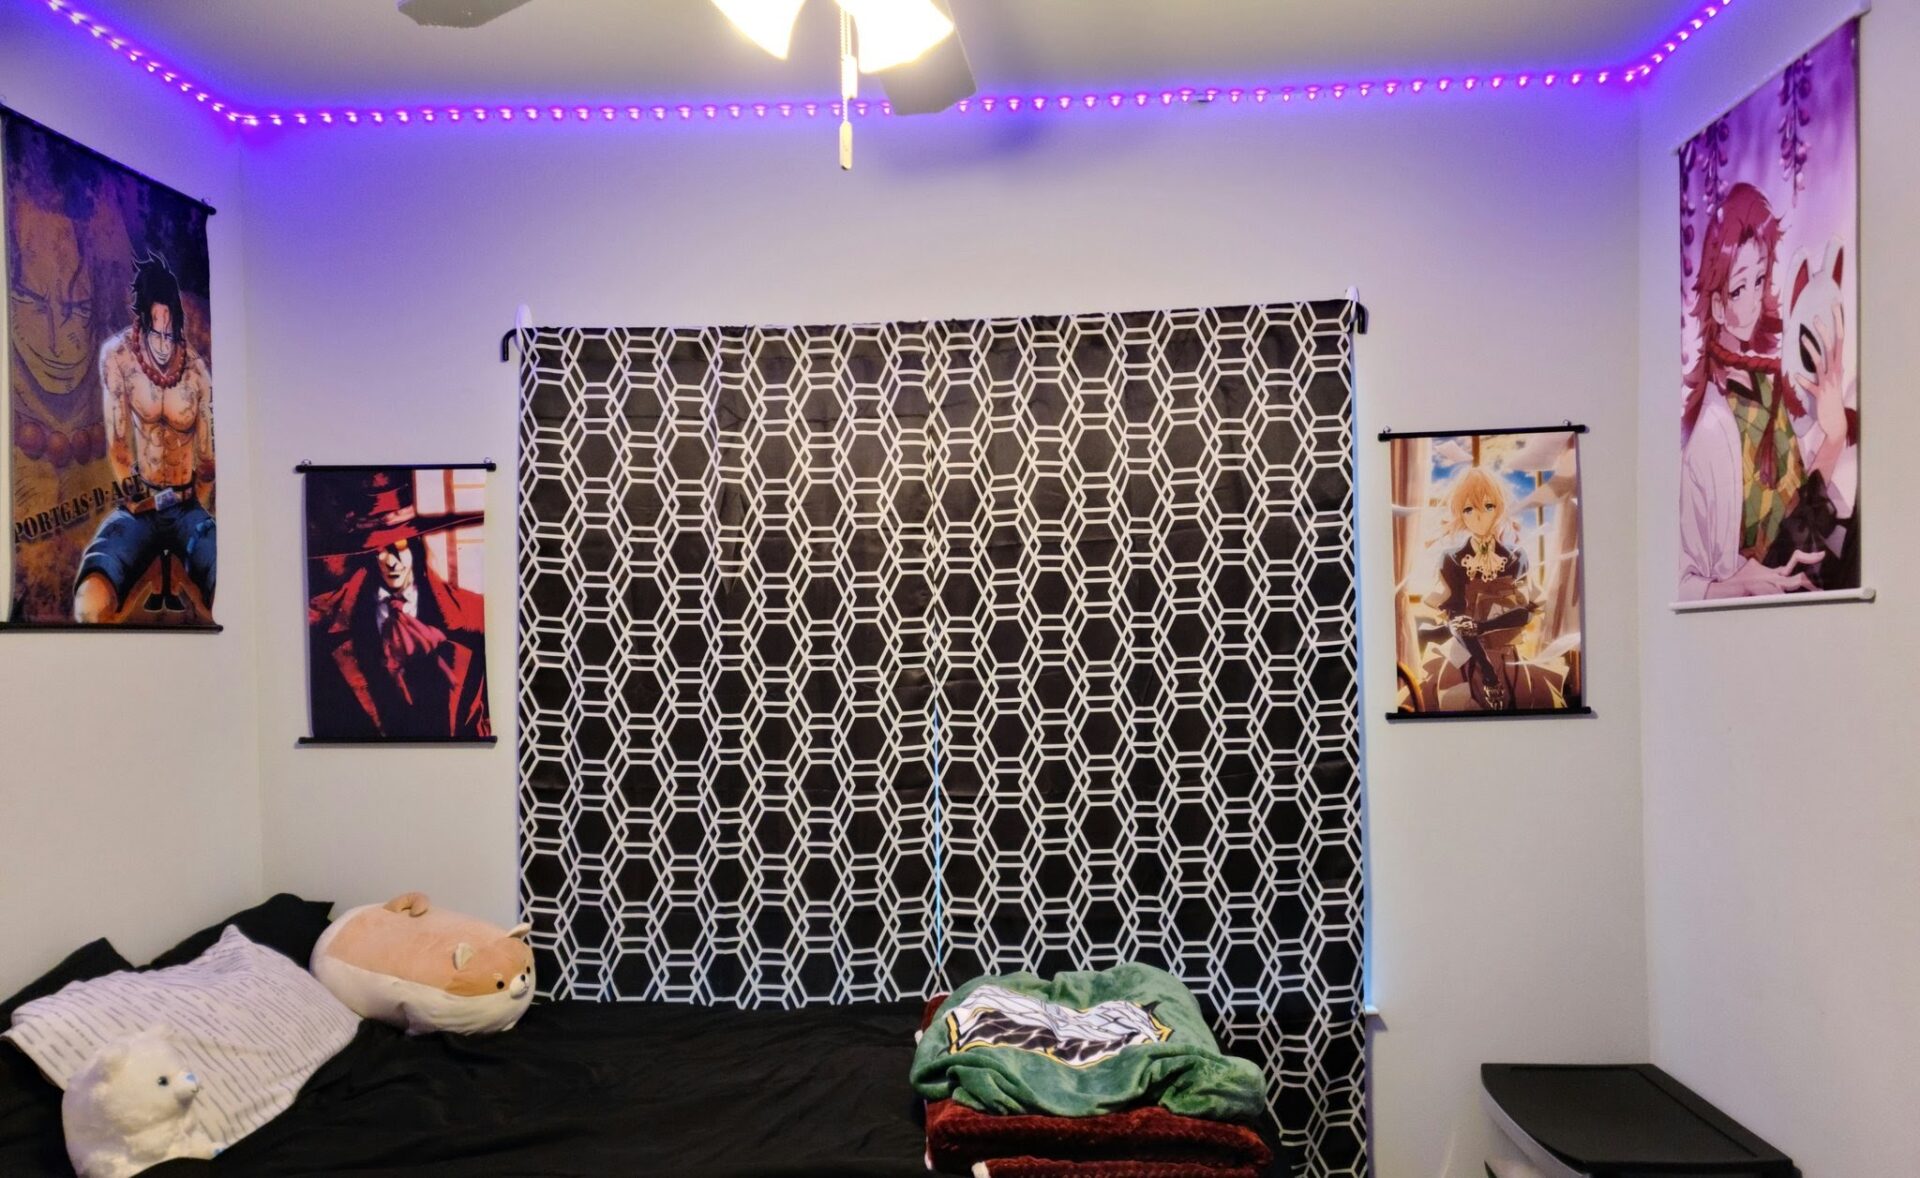 40 Awesome Anime Room Decor Ideas In